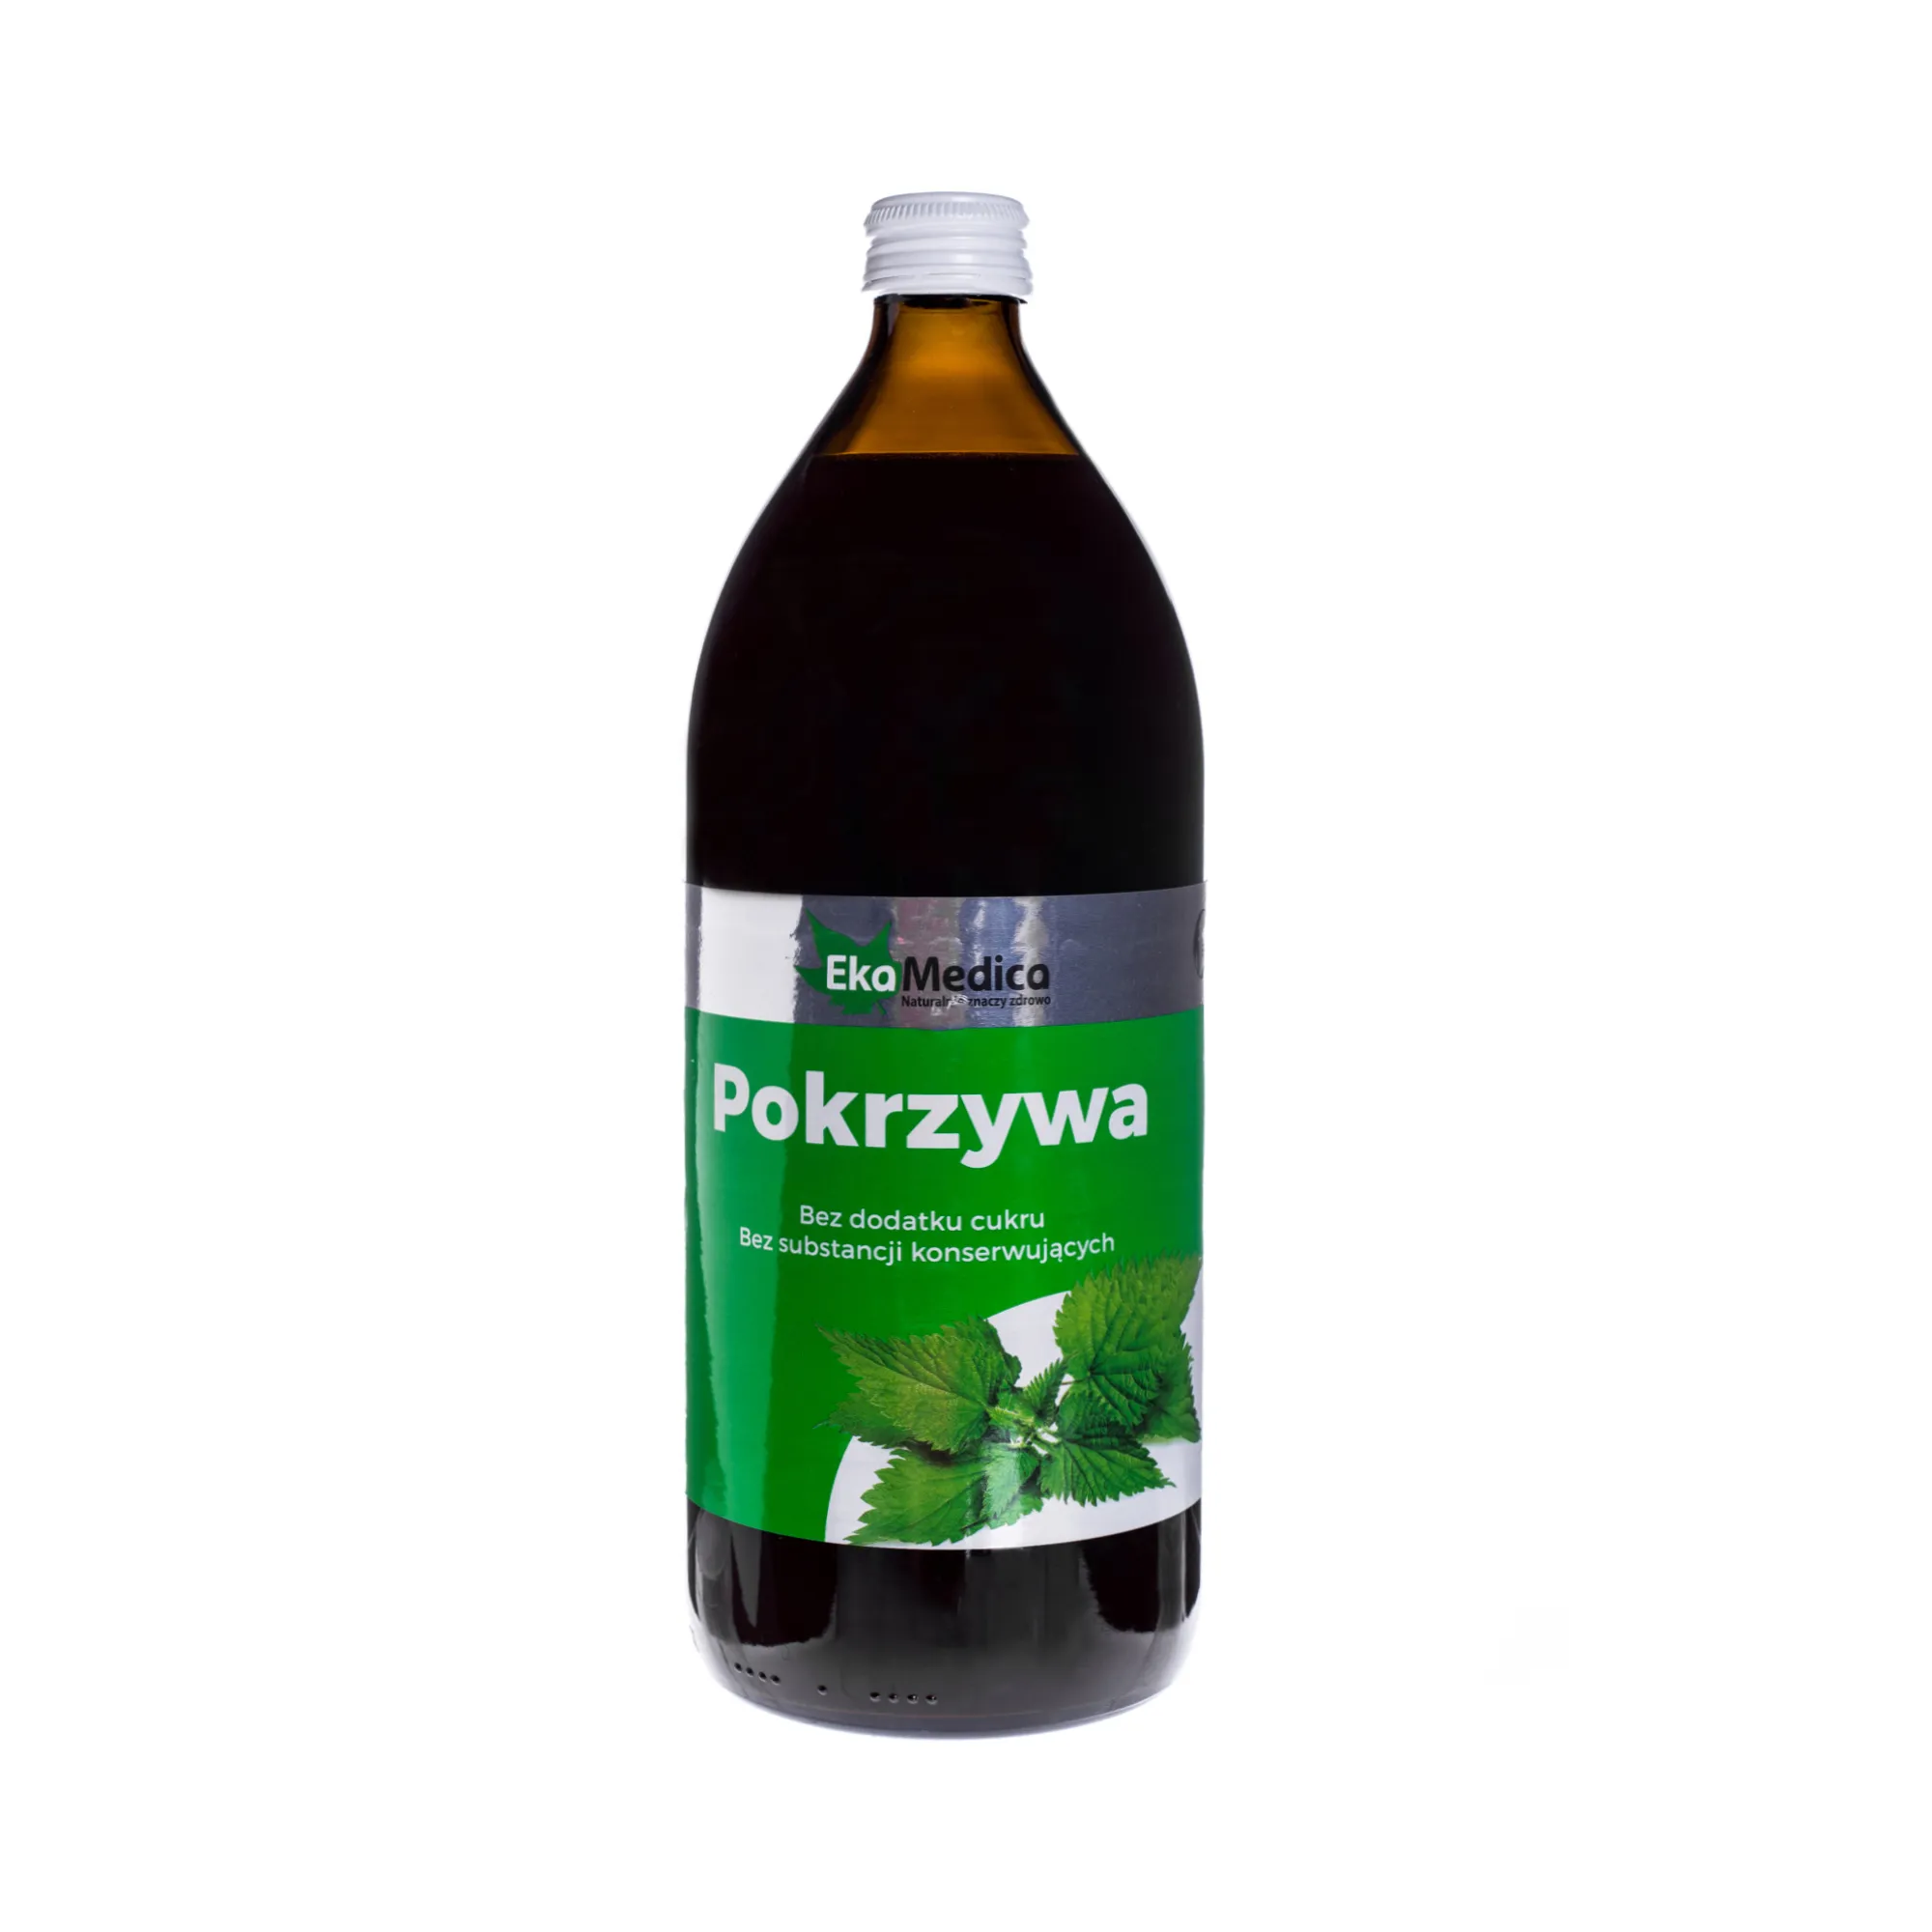 Pokrzywa, plyn, suplement diety, 1000 ml